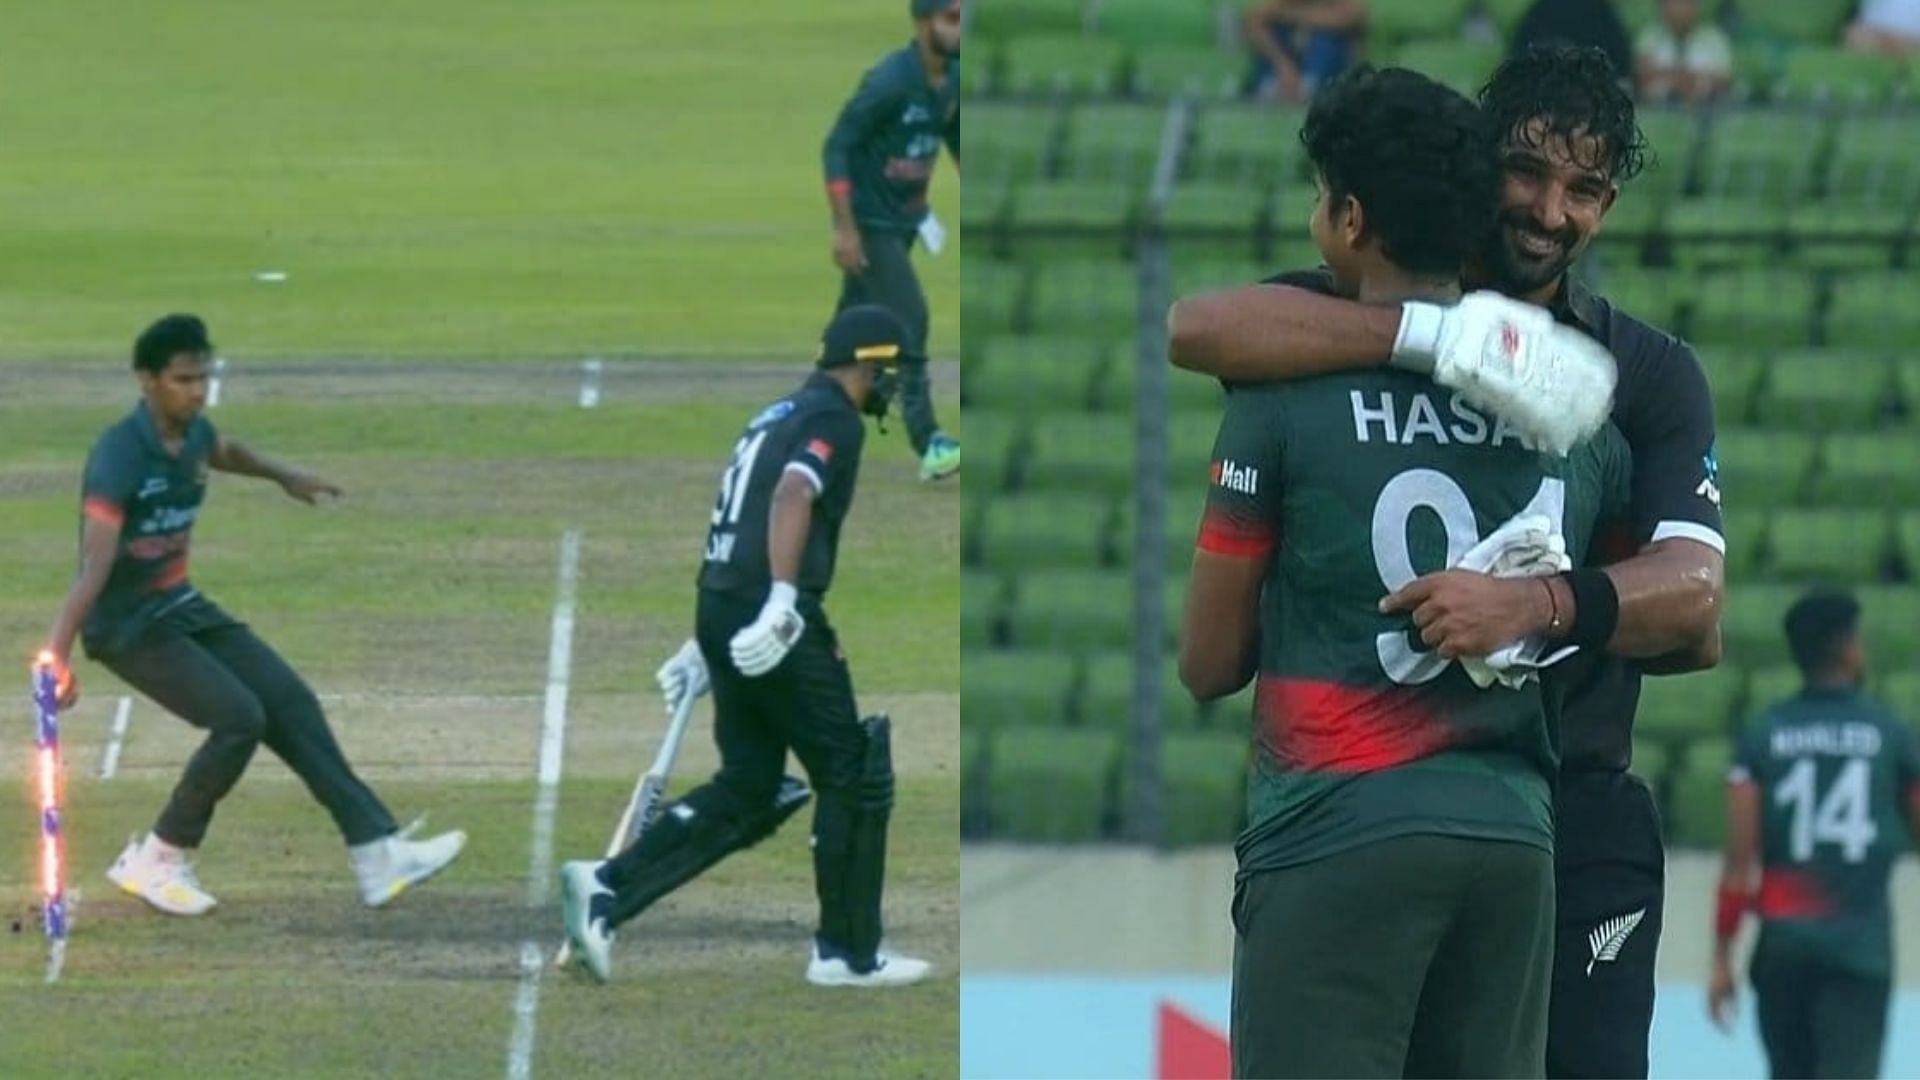 Snippets from the run-out drama involving Ish Sodhi (P.C.:X)